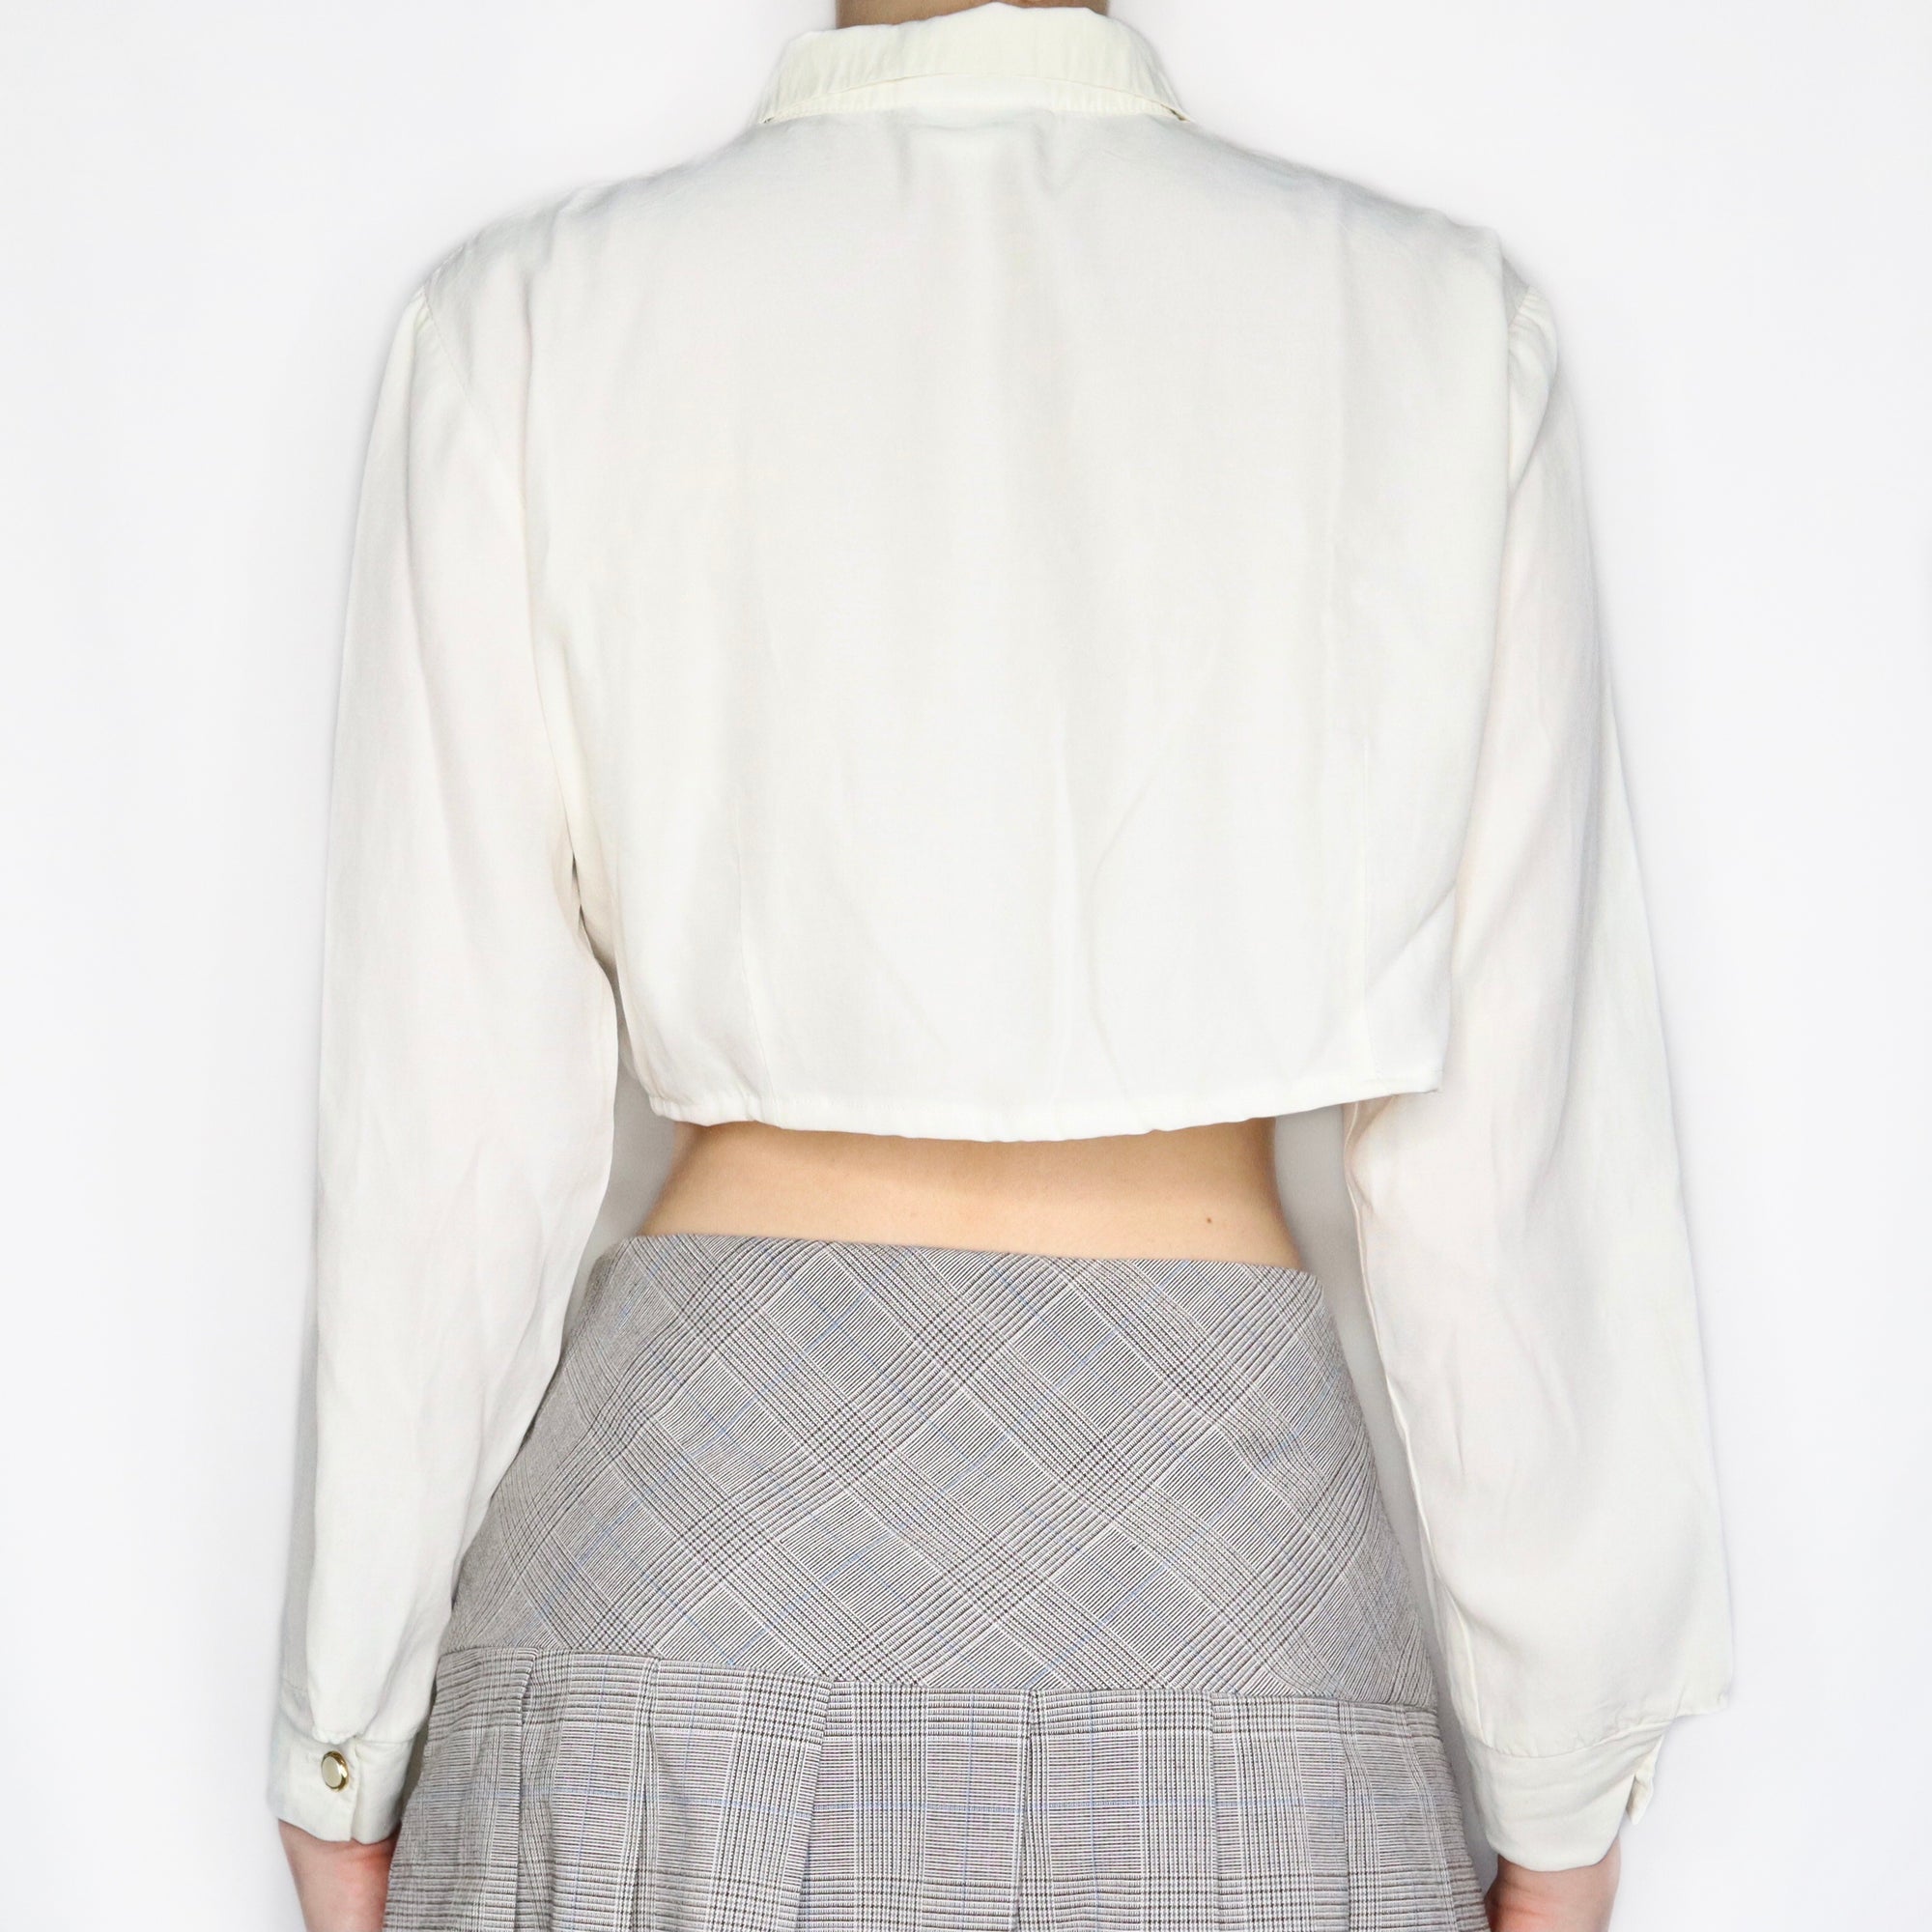 Vintage 80s Cropped White Blouse